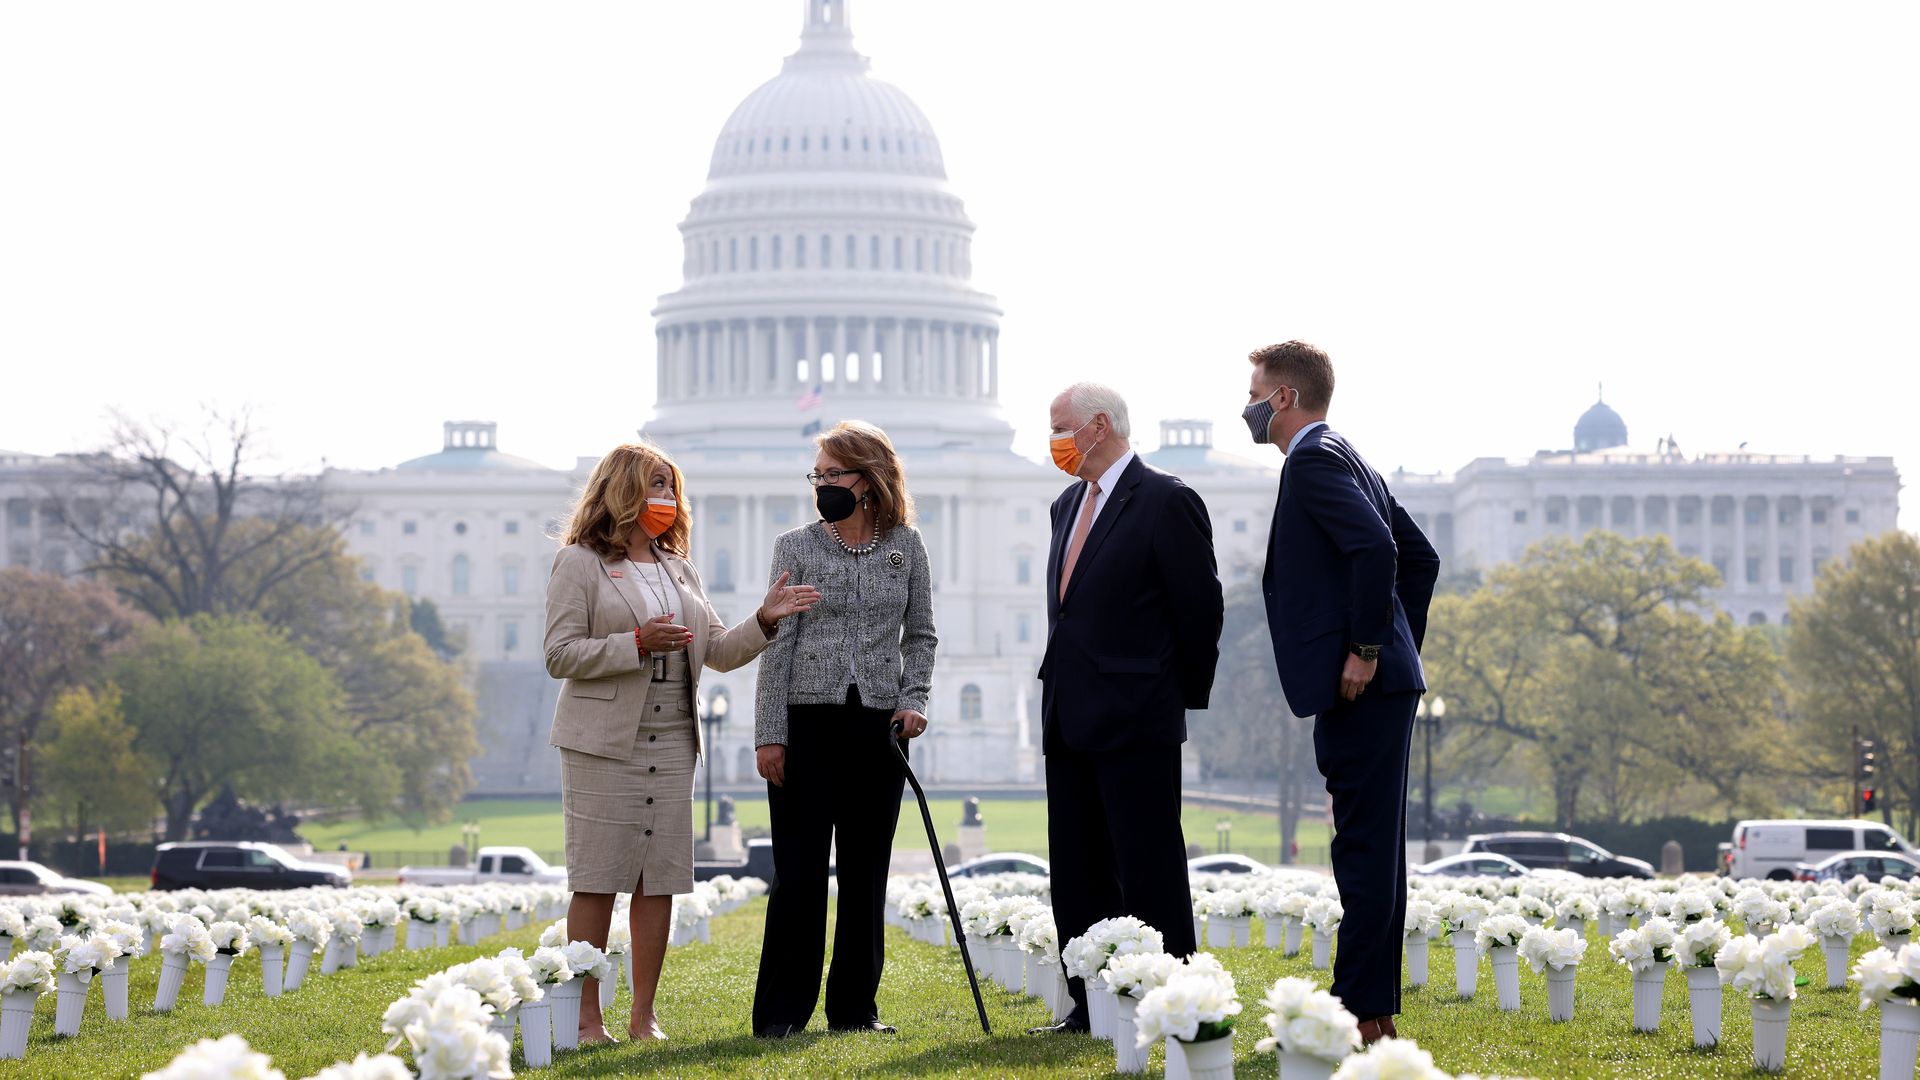 Former Rep. Gabby Giffords is seen amid a memorial to shooting victims erected on the National Mall.